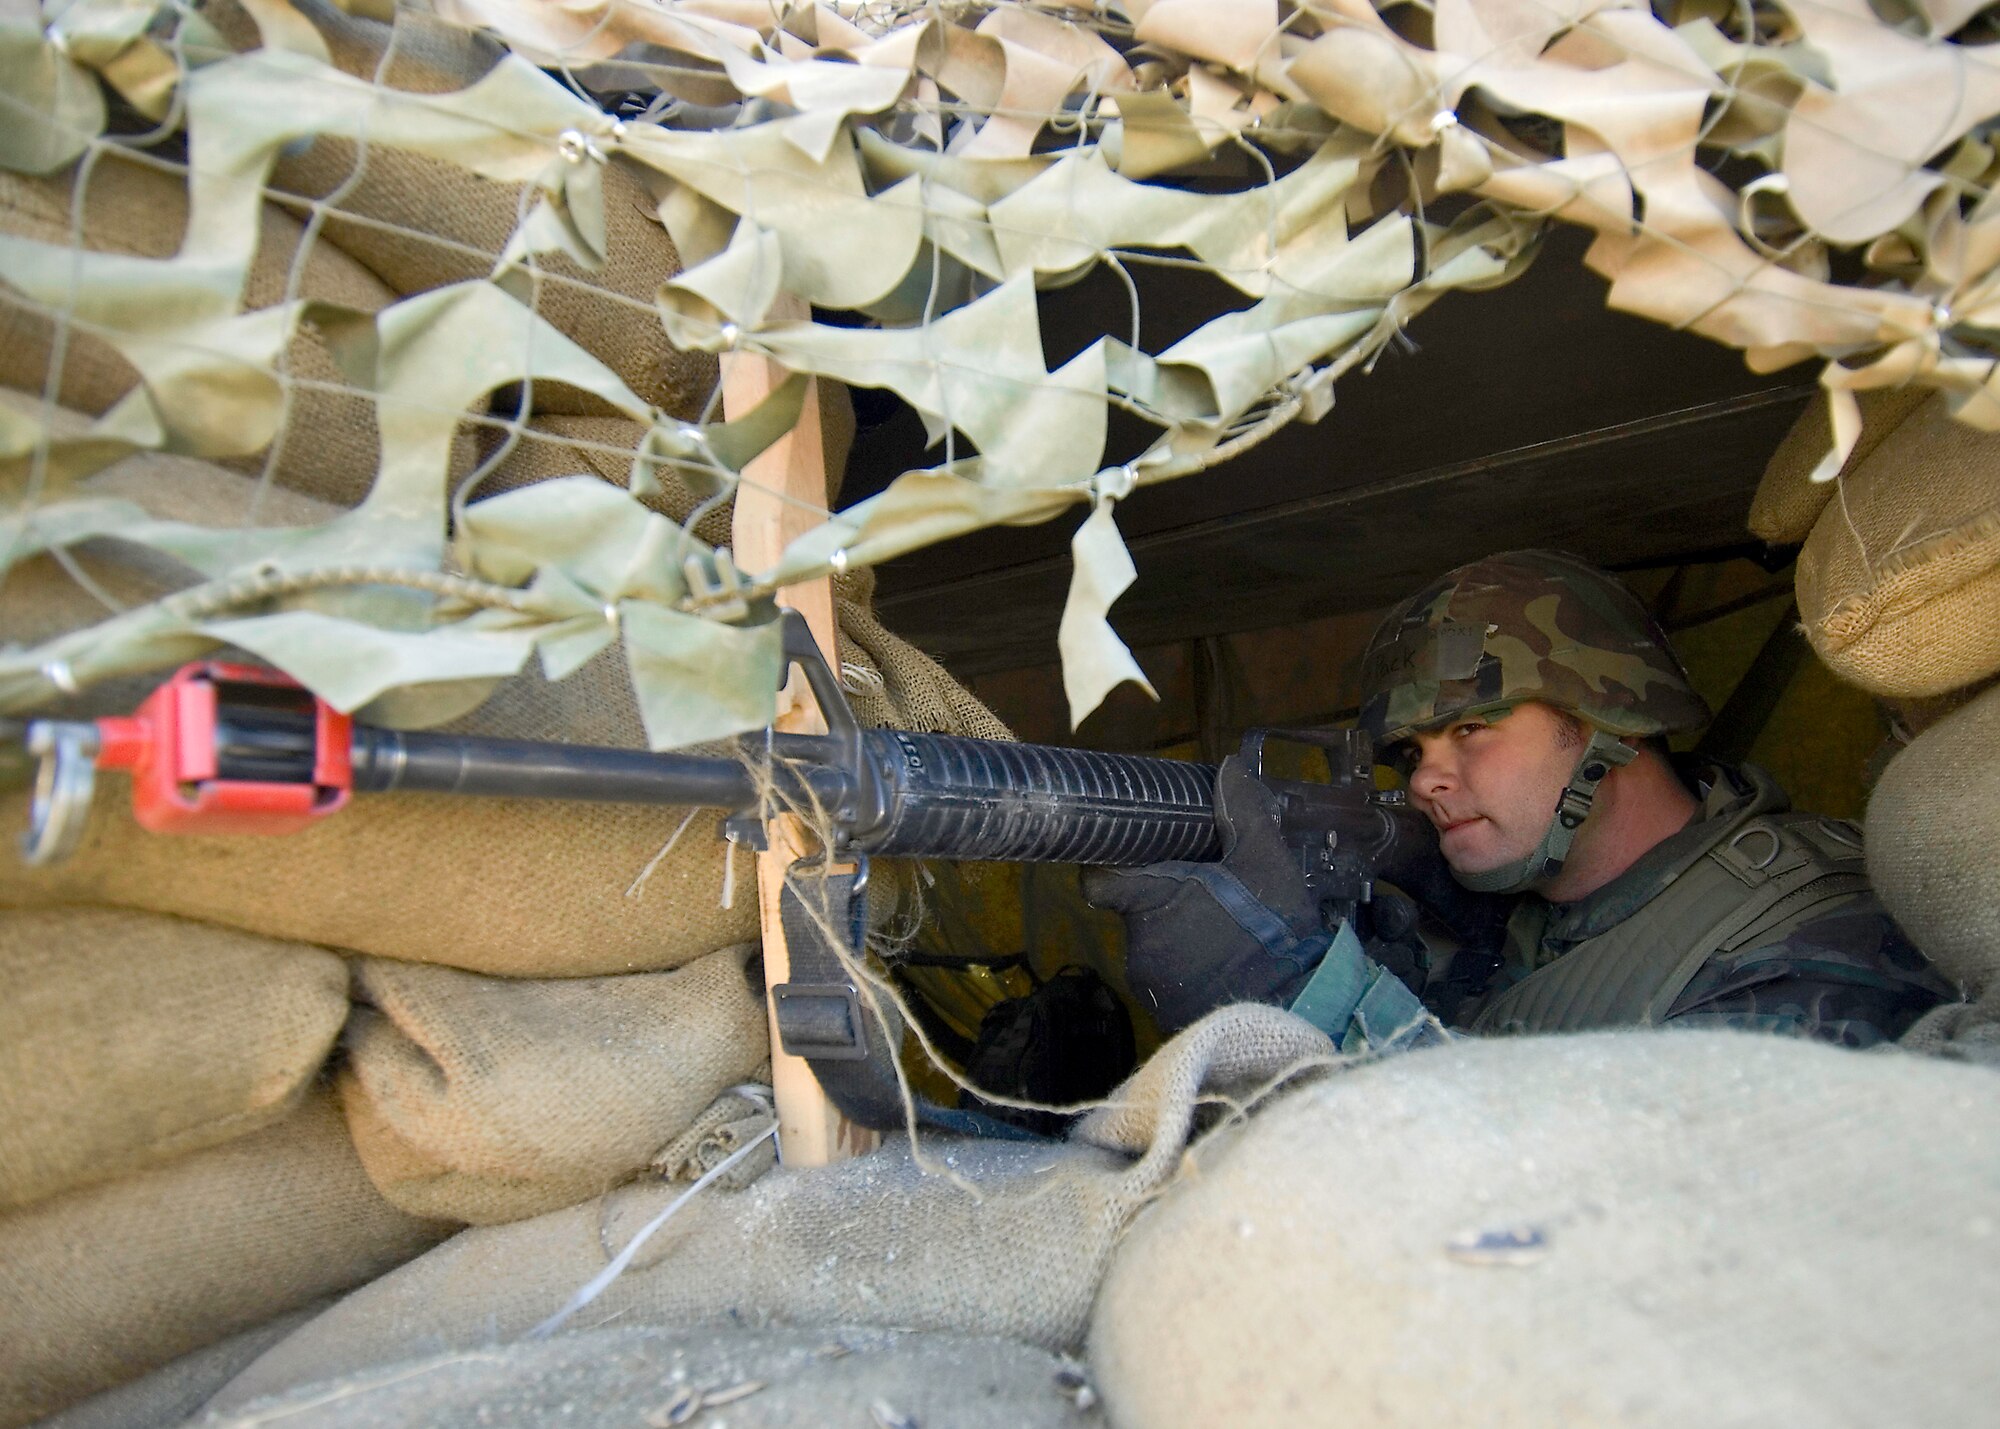 A security forces augmentee aims from a bunker during an attack. (Photo by Mike Cassidy)